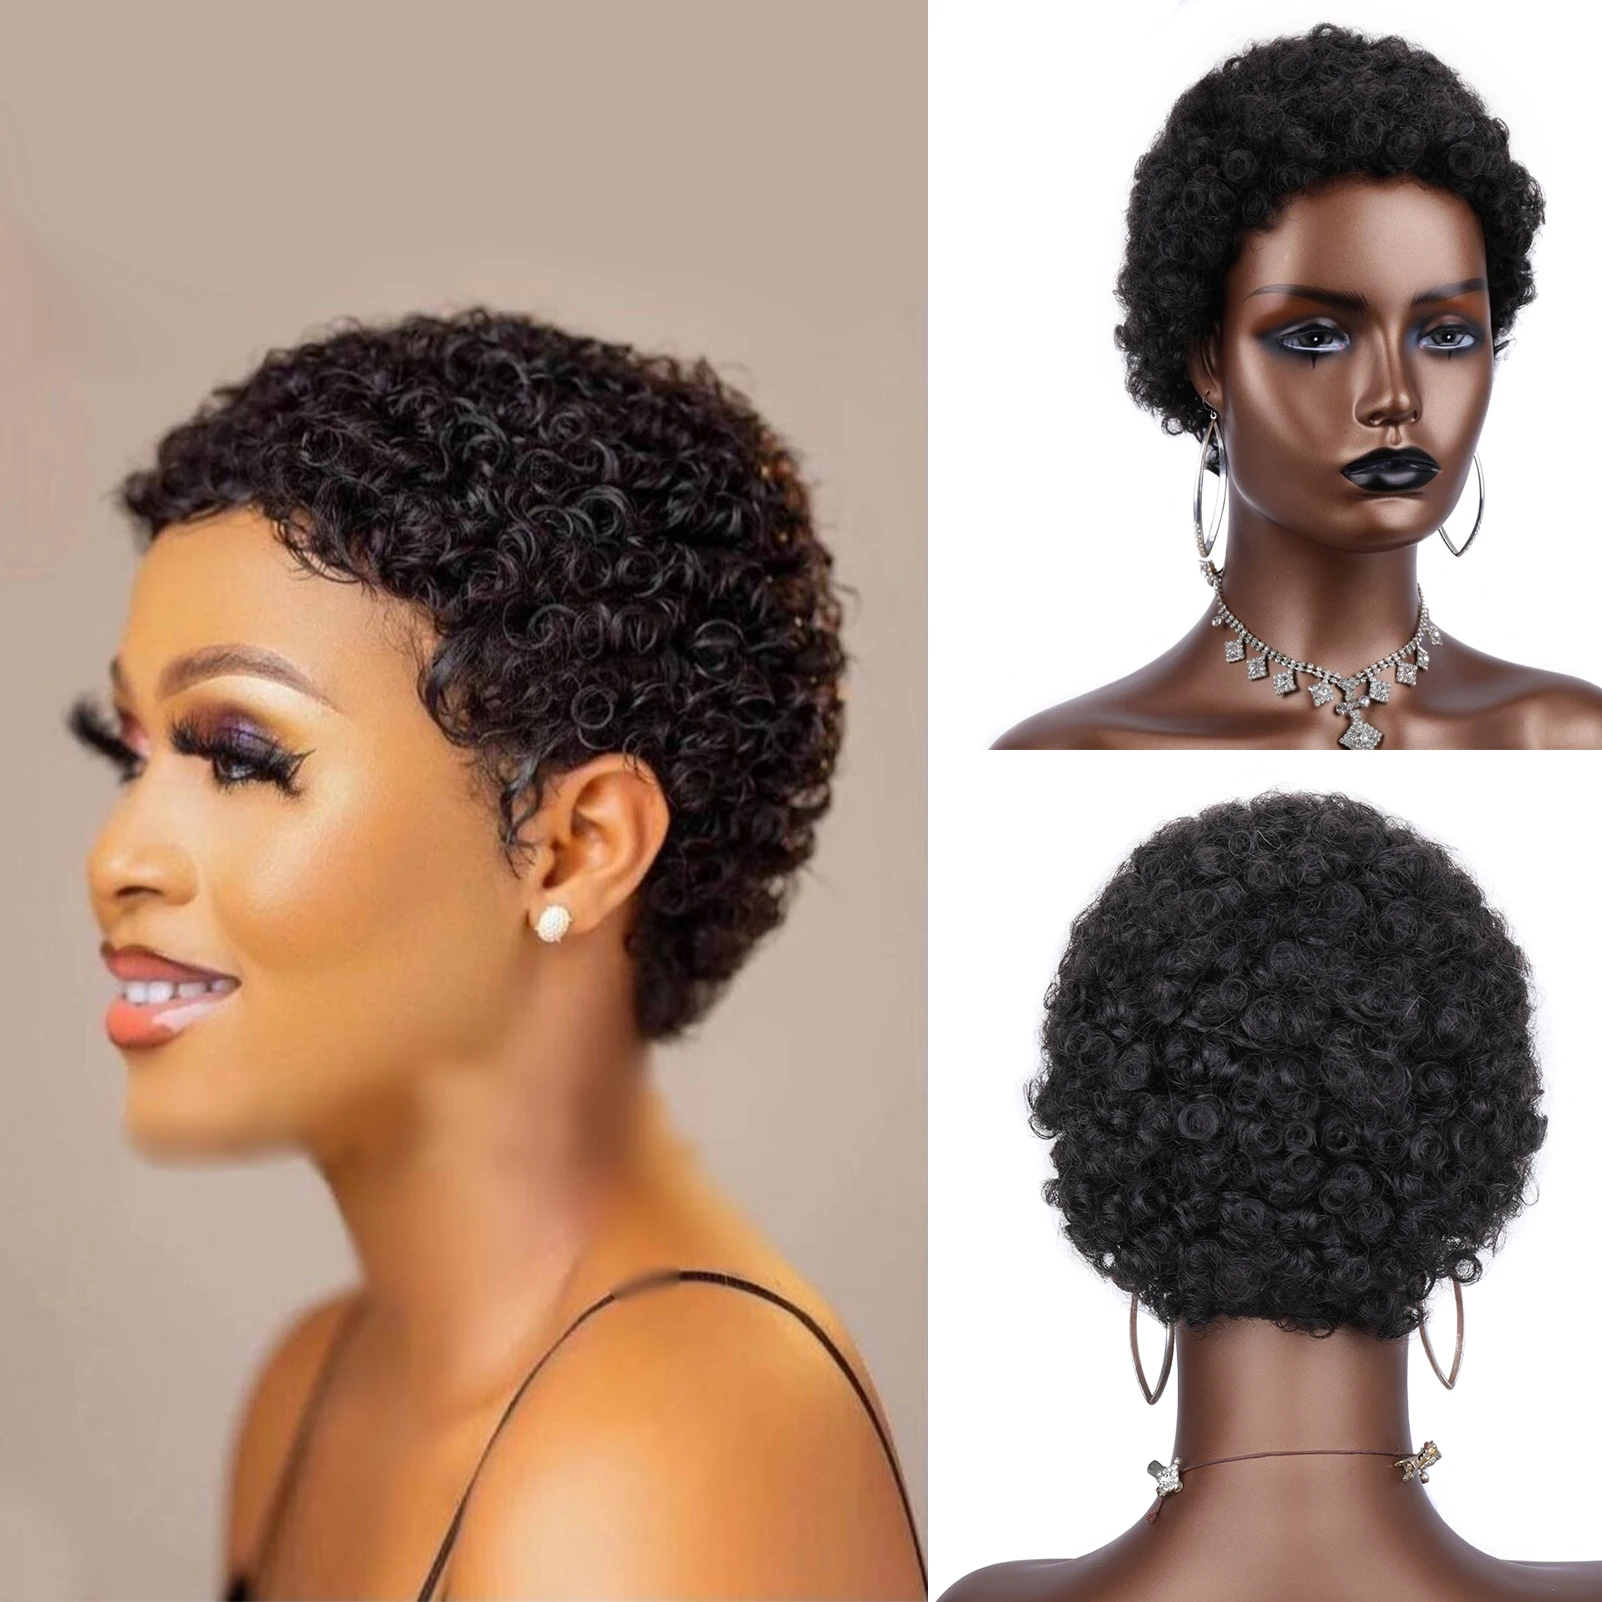 Super short afro curl pixie wig 100% human hair Brazil remy no lace wig boy - £27.95 GBP